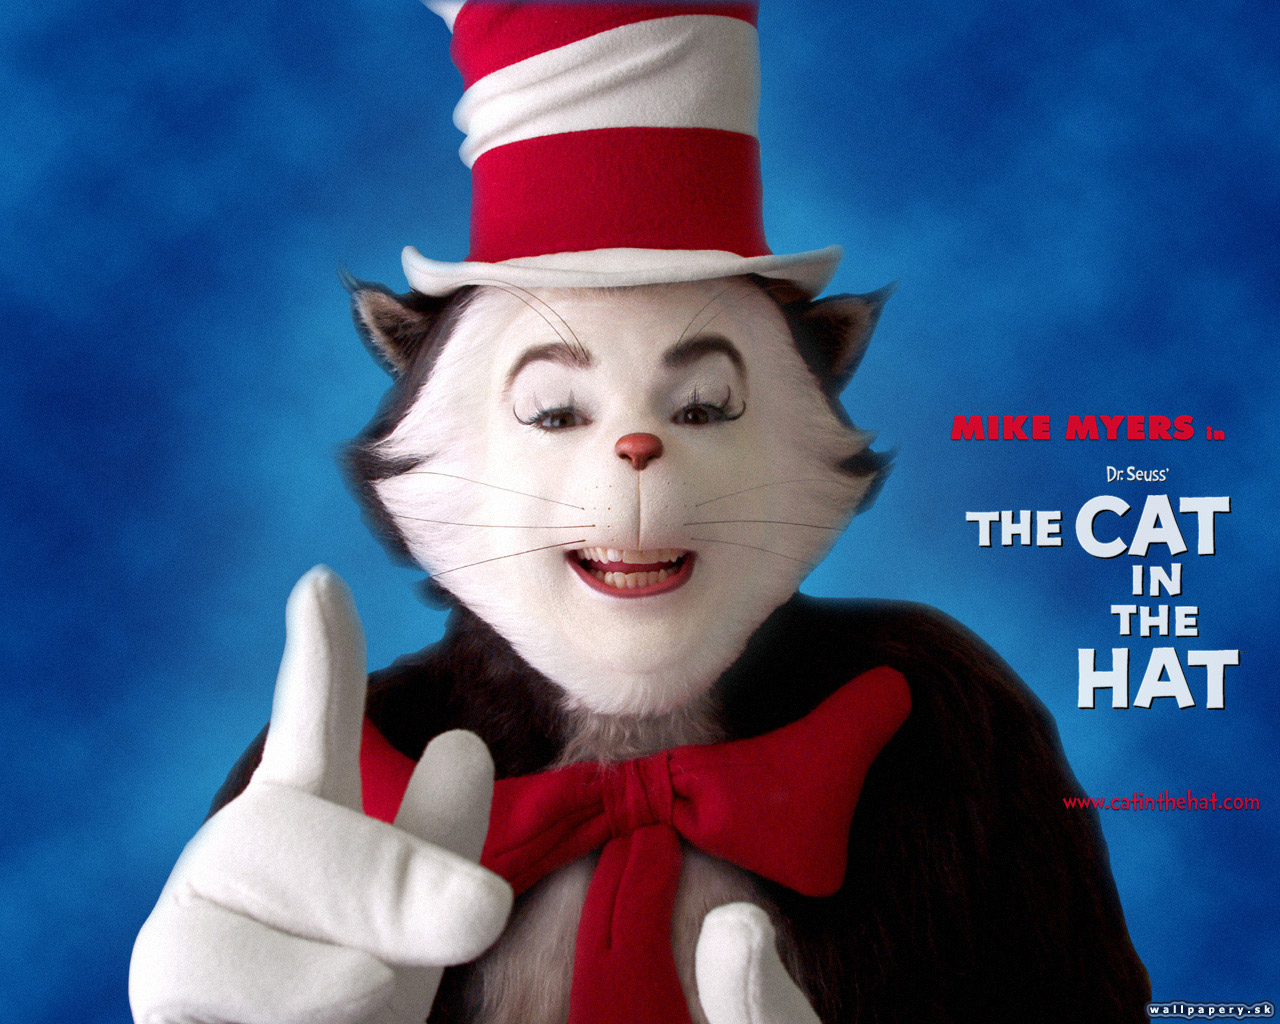 The Cat in the Hat - wallpaper 4